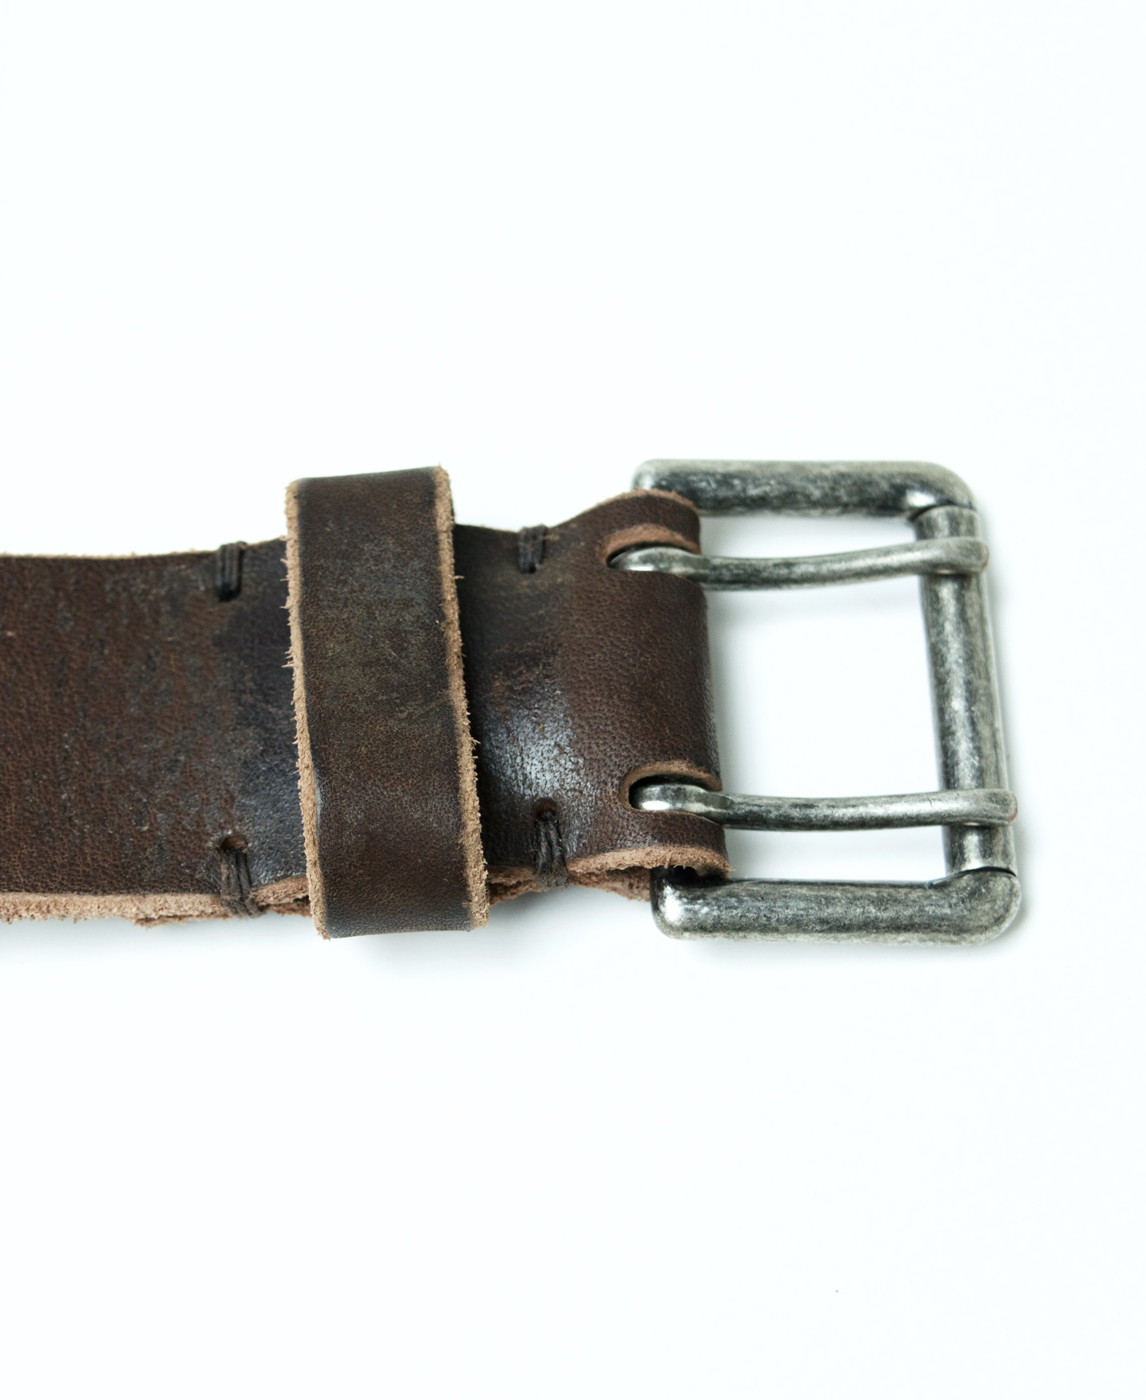 NBC1712NS 40㎜ OLD NICKEL DOUBLE PIN BUCKLE BELT